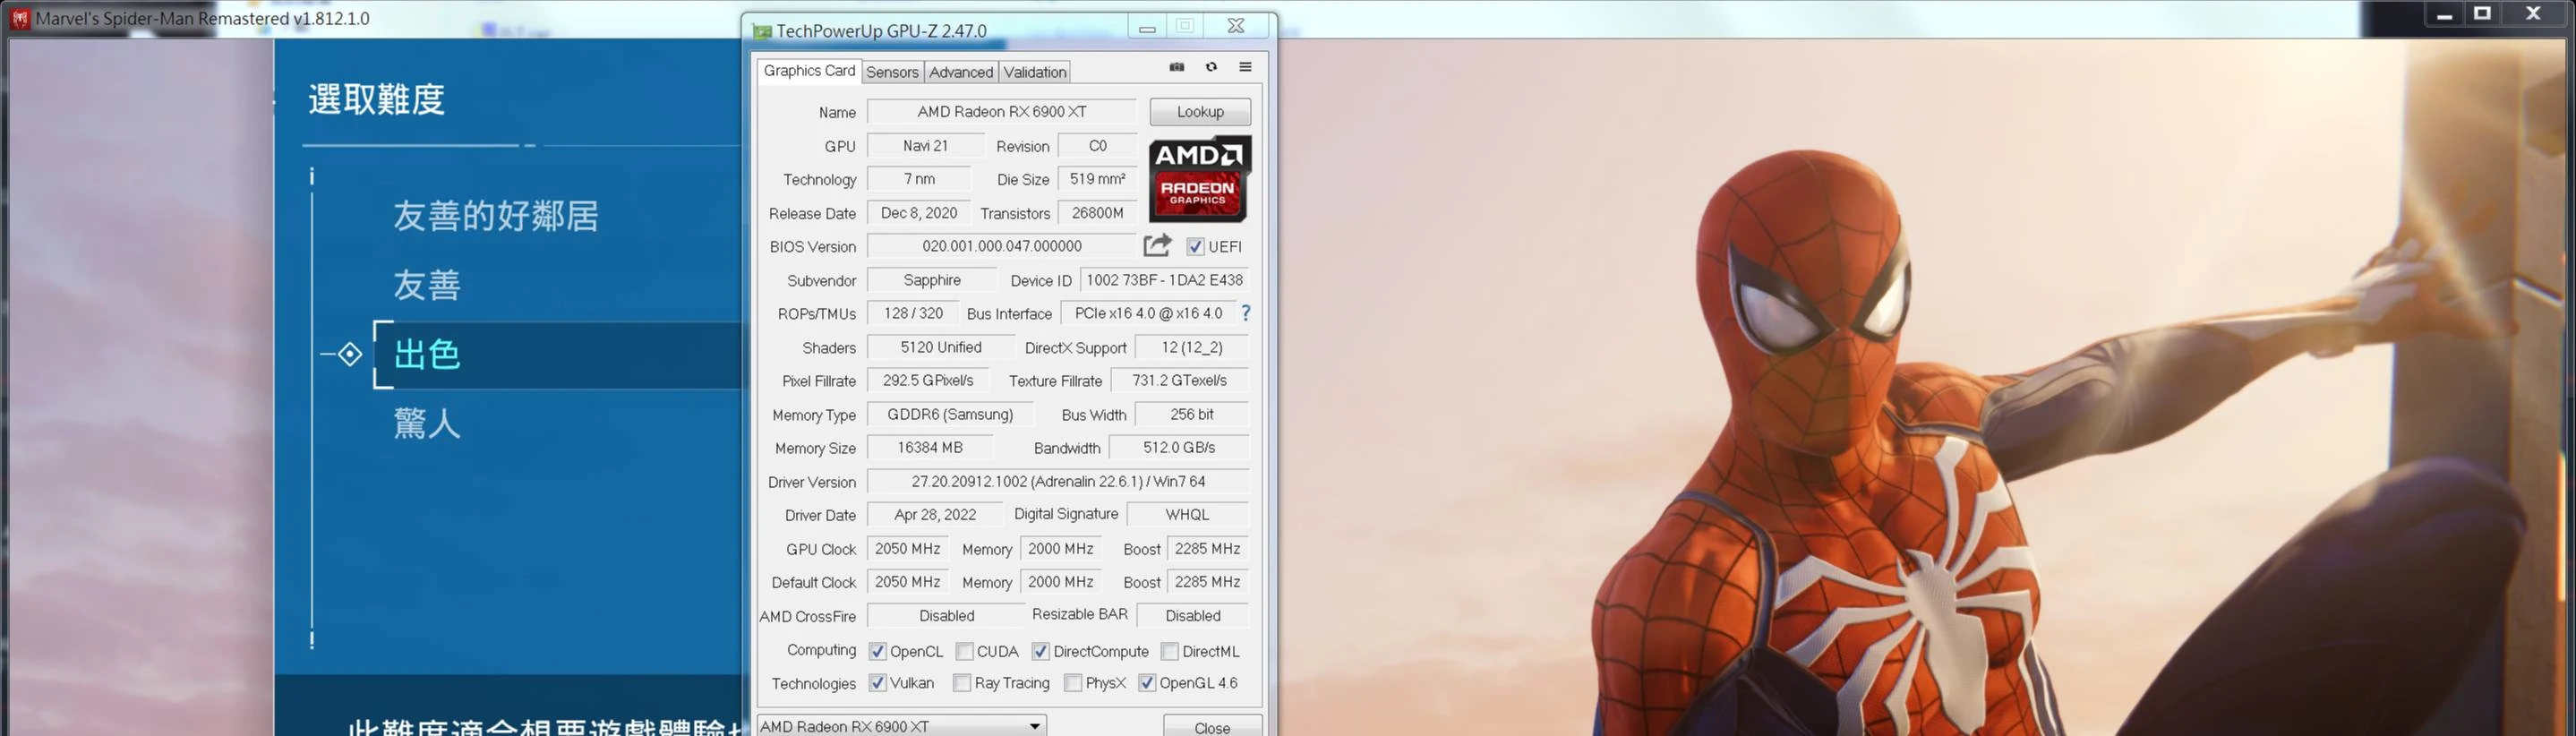 How to play Spider-man Remastered on Windows PC EASY method! 